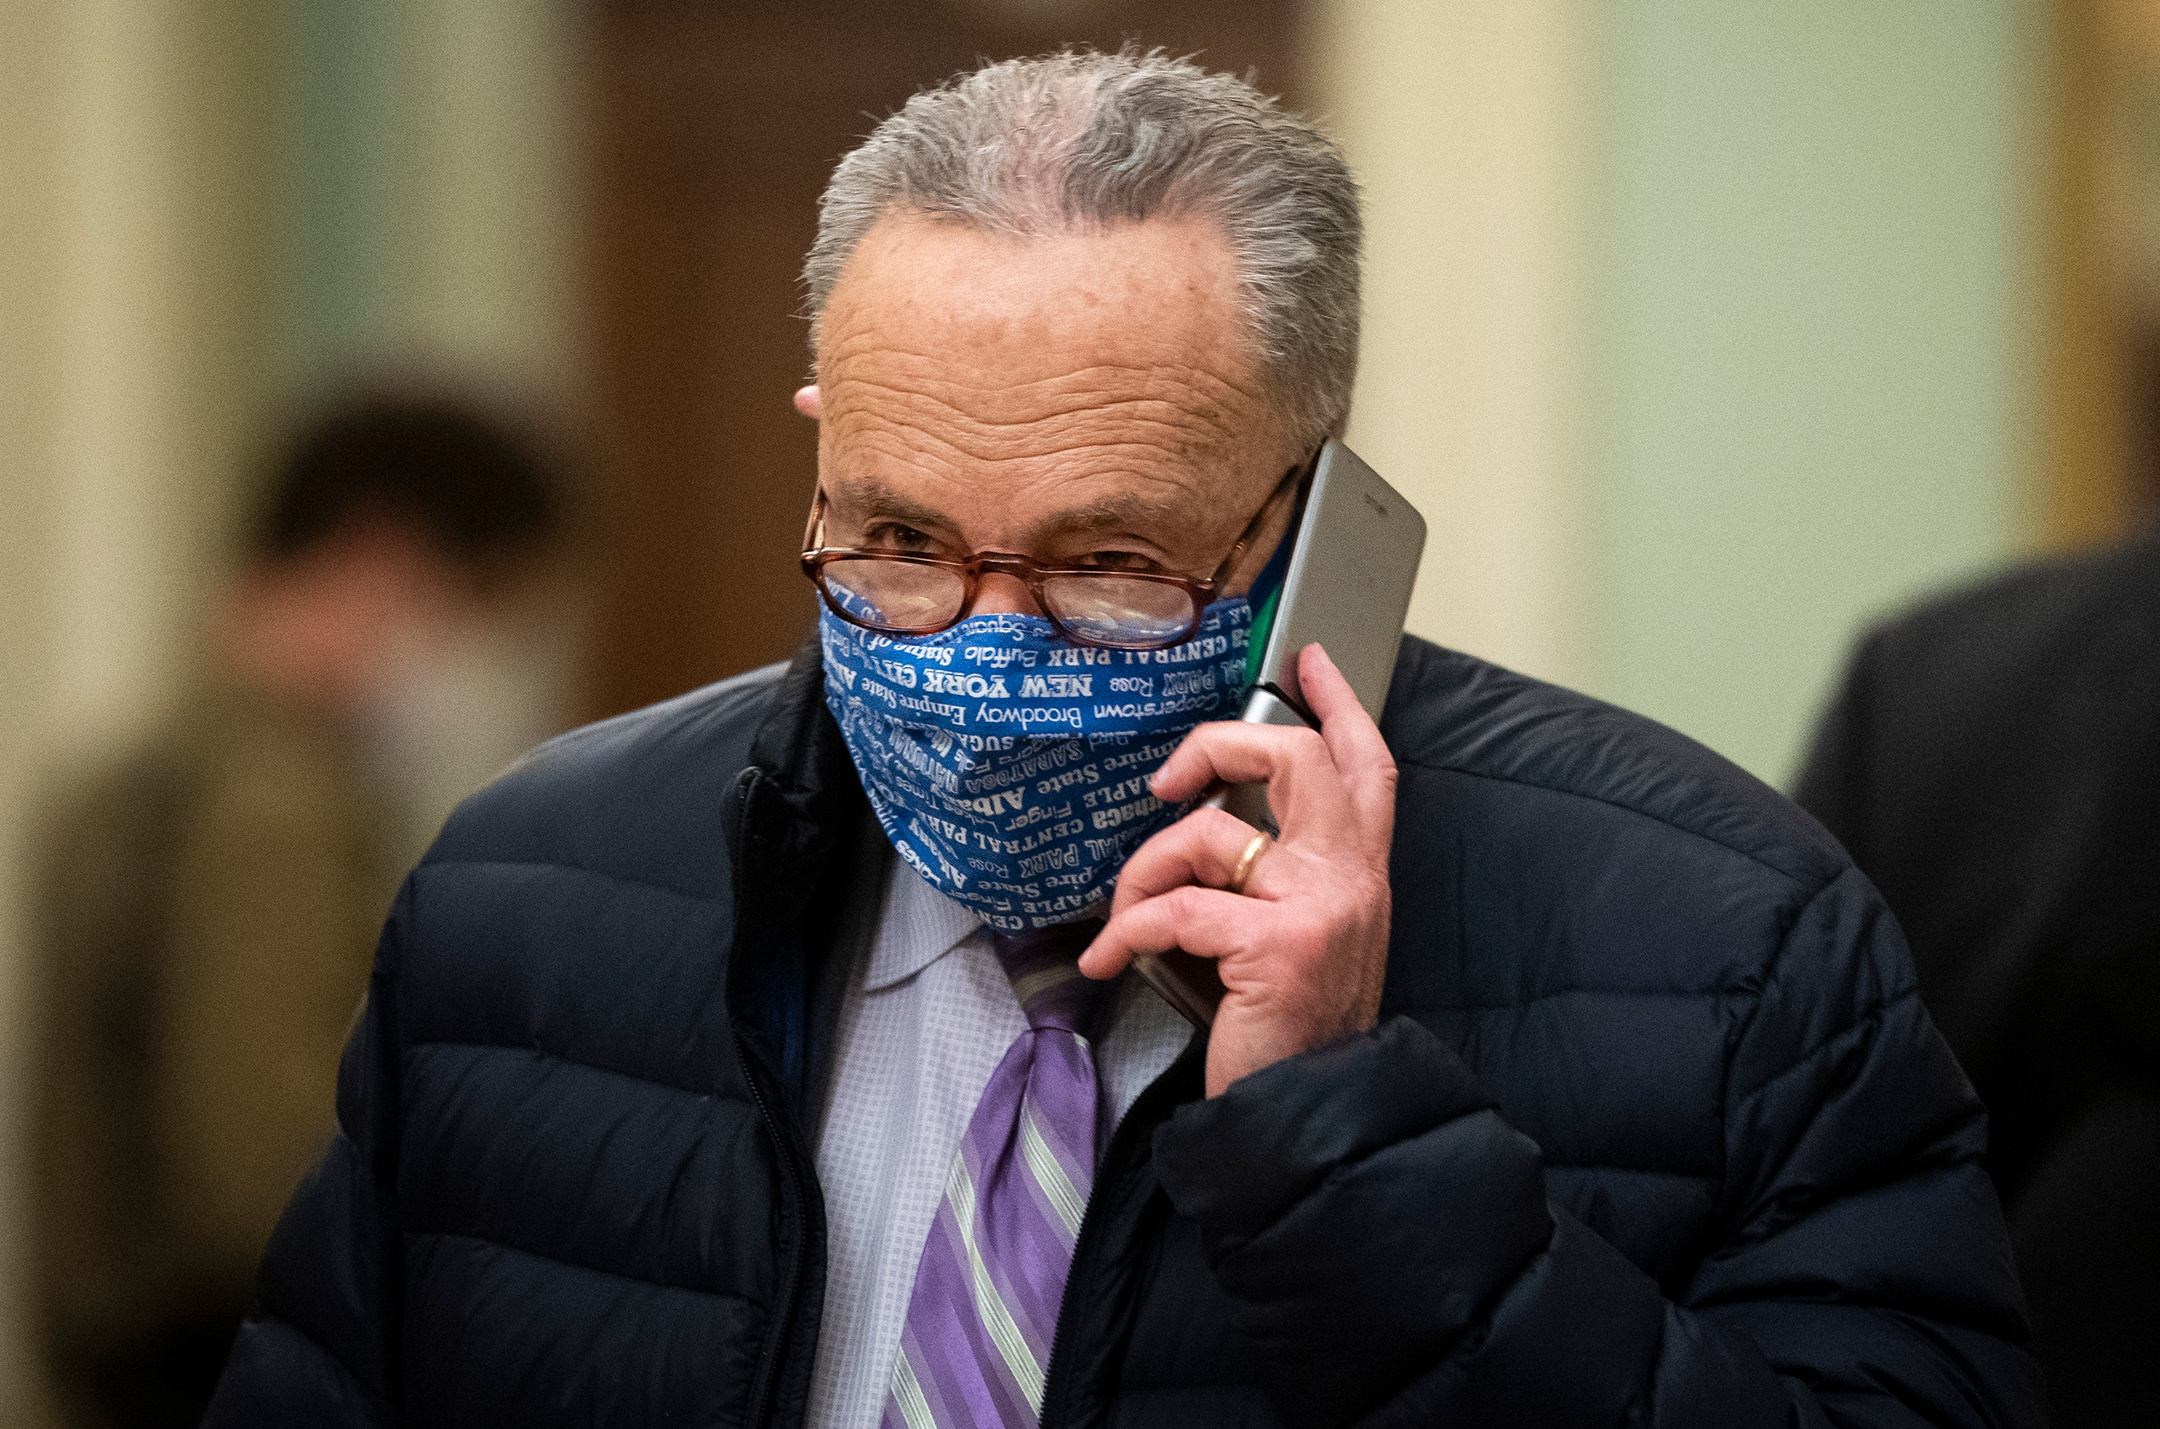 Chuck Schumer wearing a face mask and puffy coat while talking on his cell phone